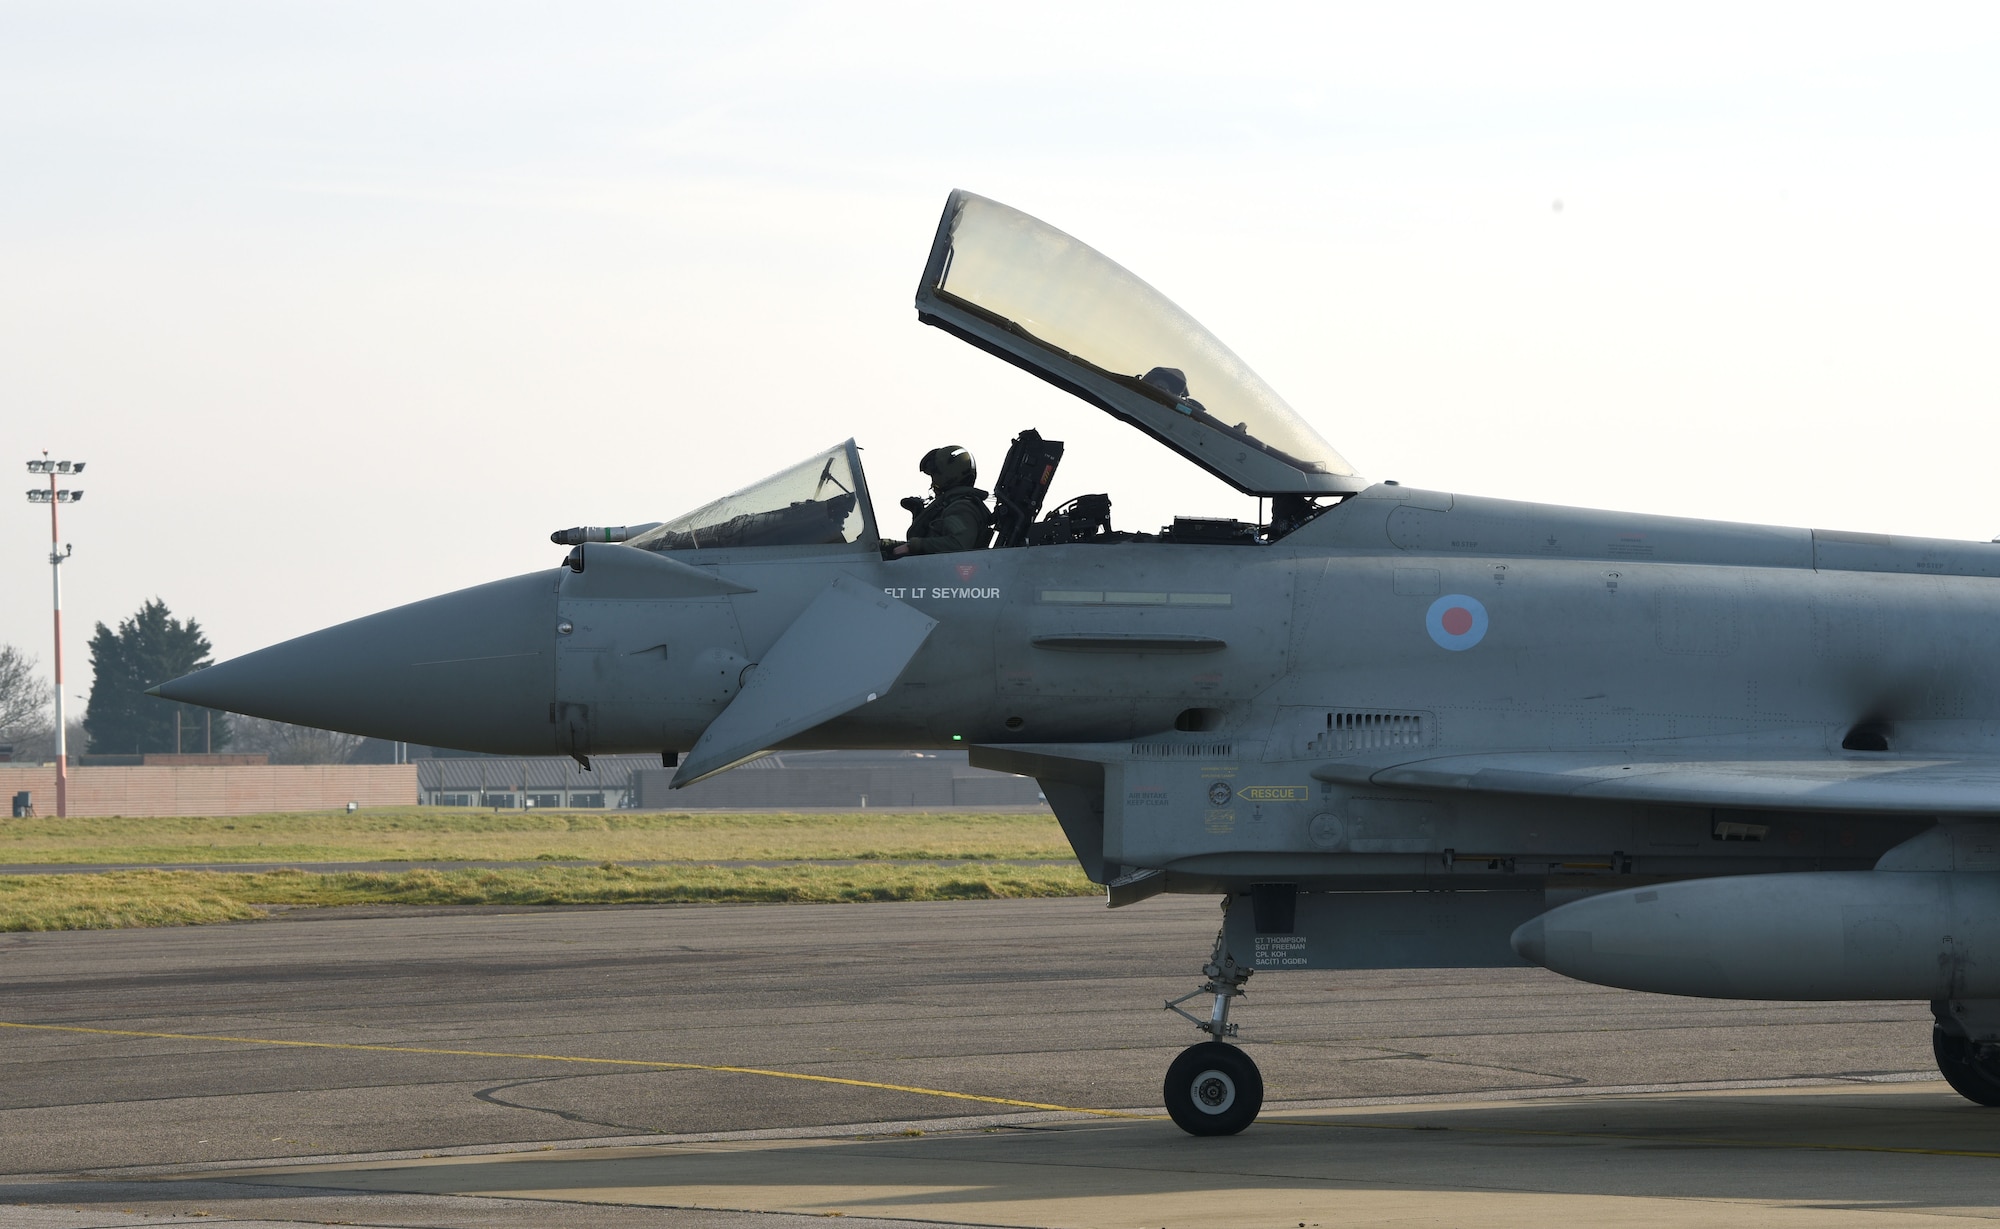 A Royal Air Force Eurofighter Typhoon FGR4 sits on the taxiway as a pilot does pre-checks prior to take-off at Royal Air Force Mildenhall, England, Feb. 15, 2023. The aircraft from RAF Coningsby, England, diverted here due to bad weather. The Typhoon is a highly capable and extremely agile multi-role combat aircraft, capable of being deployed for the full spectrum of air operations, including air policing, peace support and high-intensity conflict. (U.S. Air Force photo by Karen Abeyasekere)